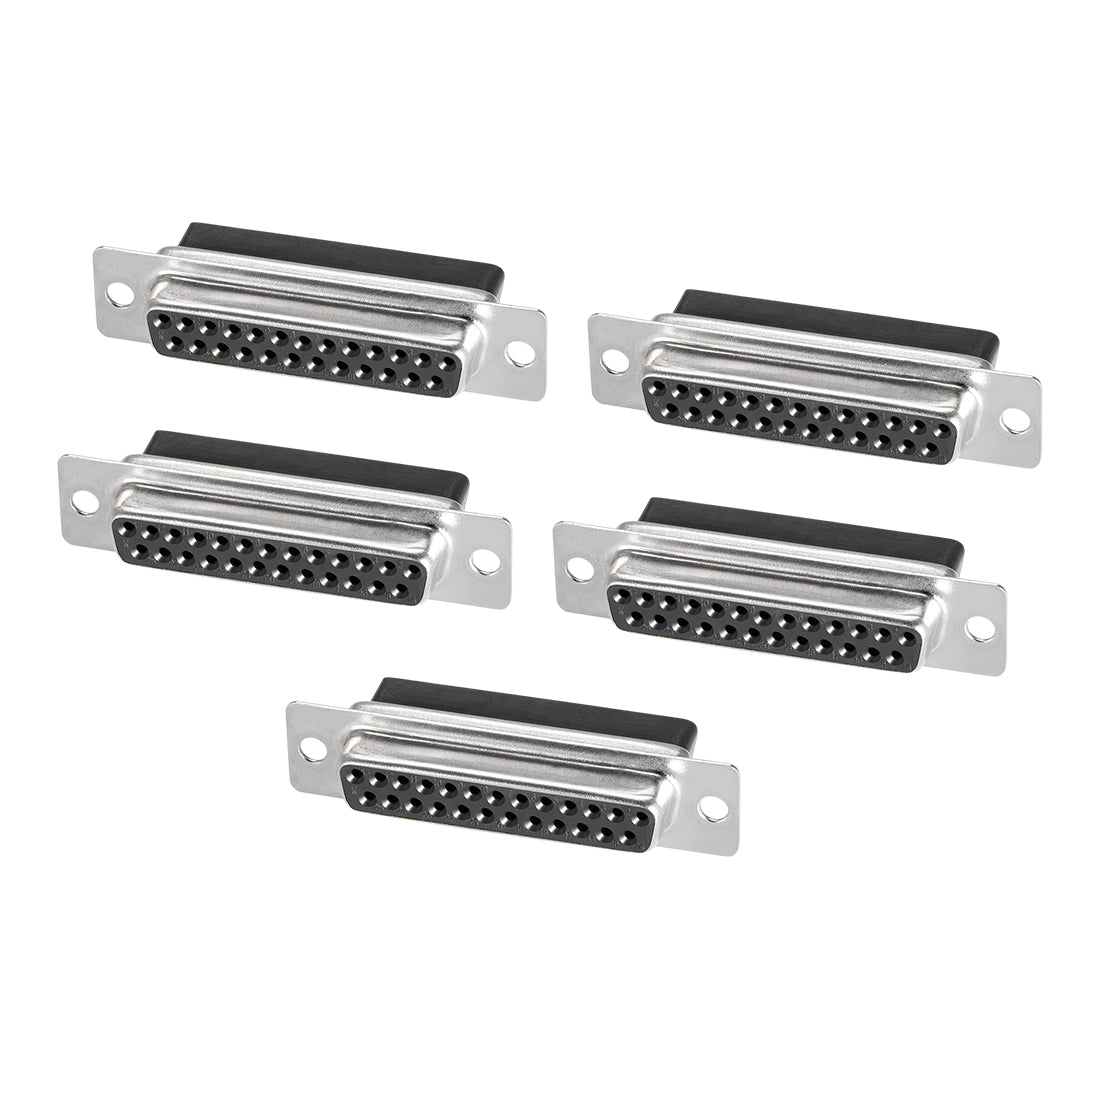 uxcell Uxcell D-sub Connector Female Socket 25-position 2-row Crimp Style Port Terminal Breakout for Mechanical Equipment Black 5pcs